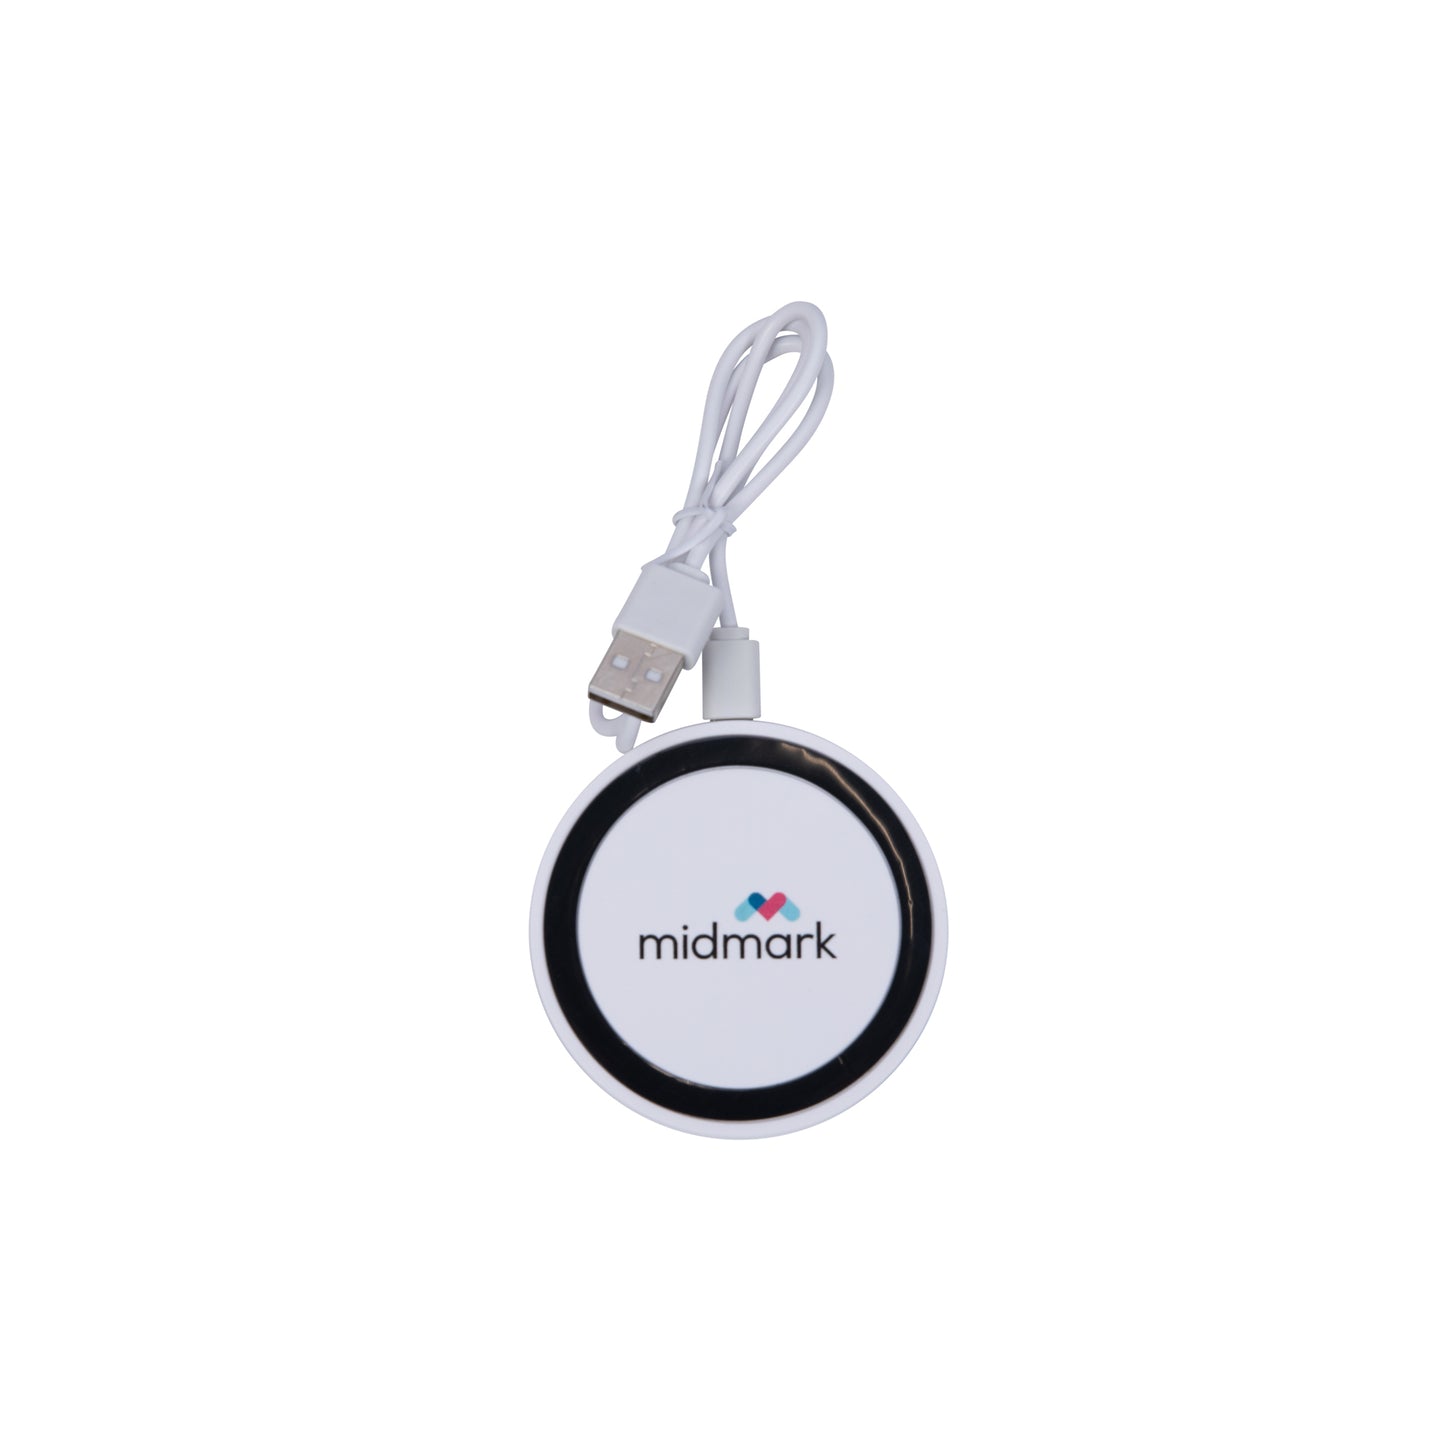 Midmark Branded Oasis Wireless Charger